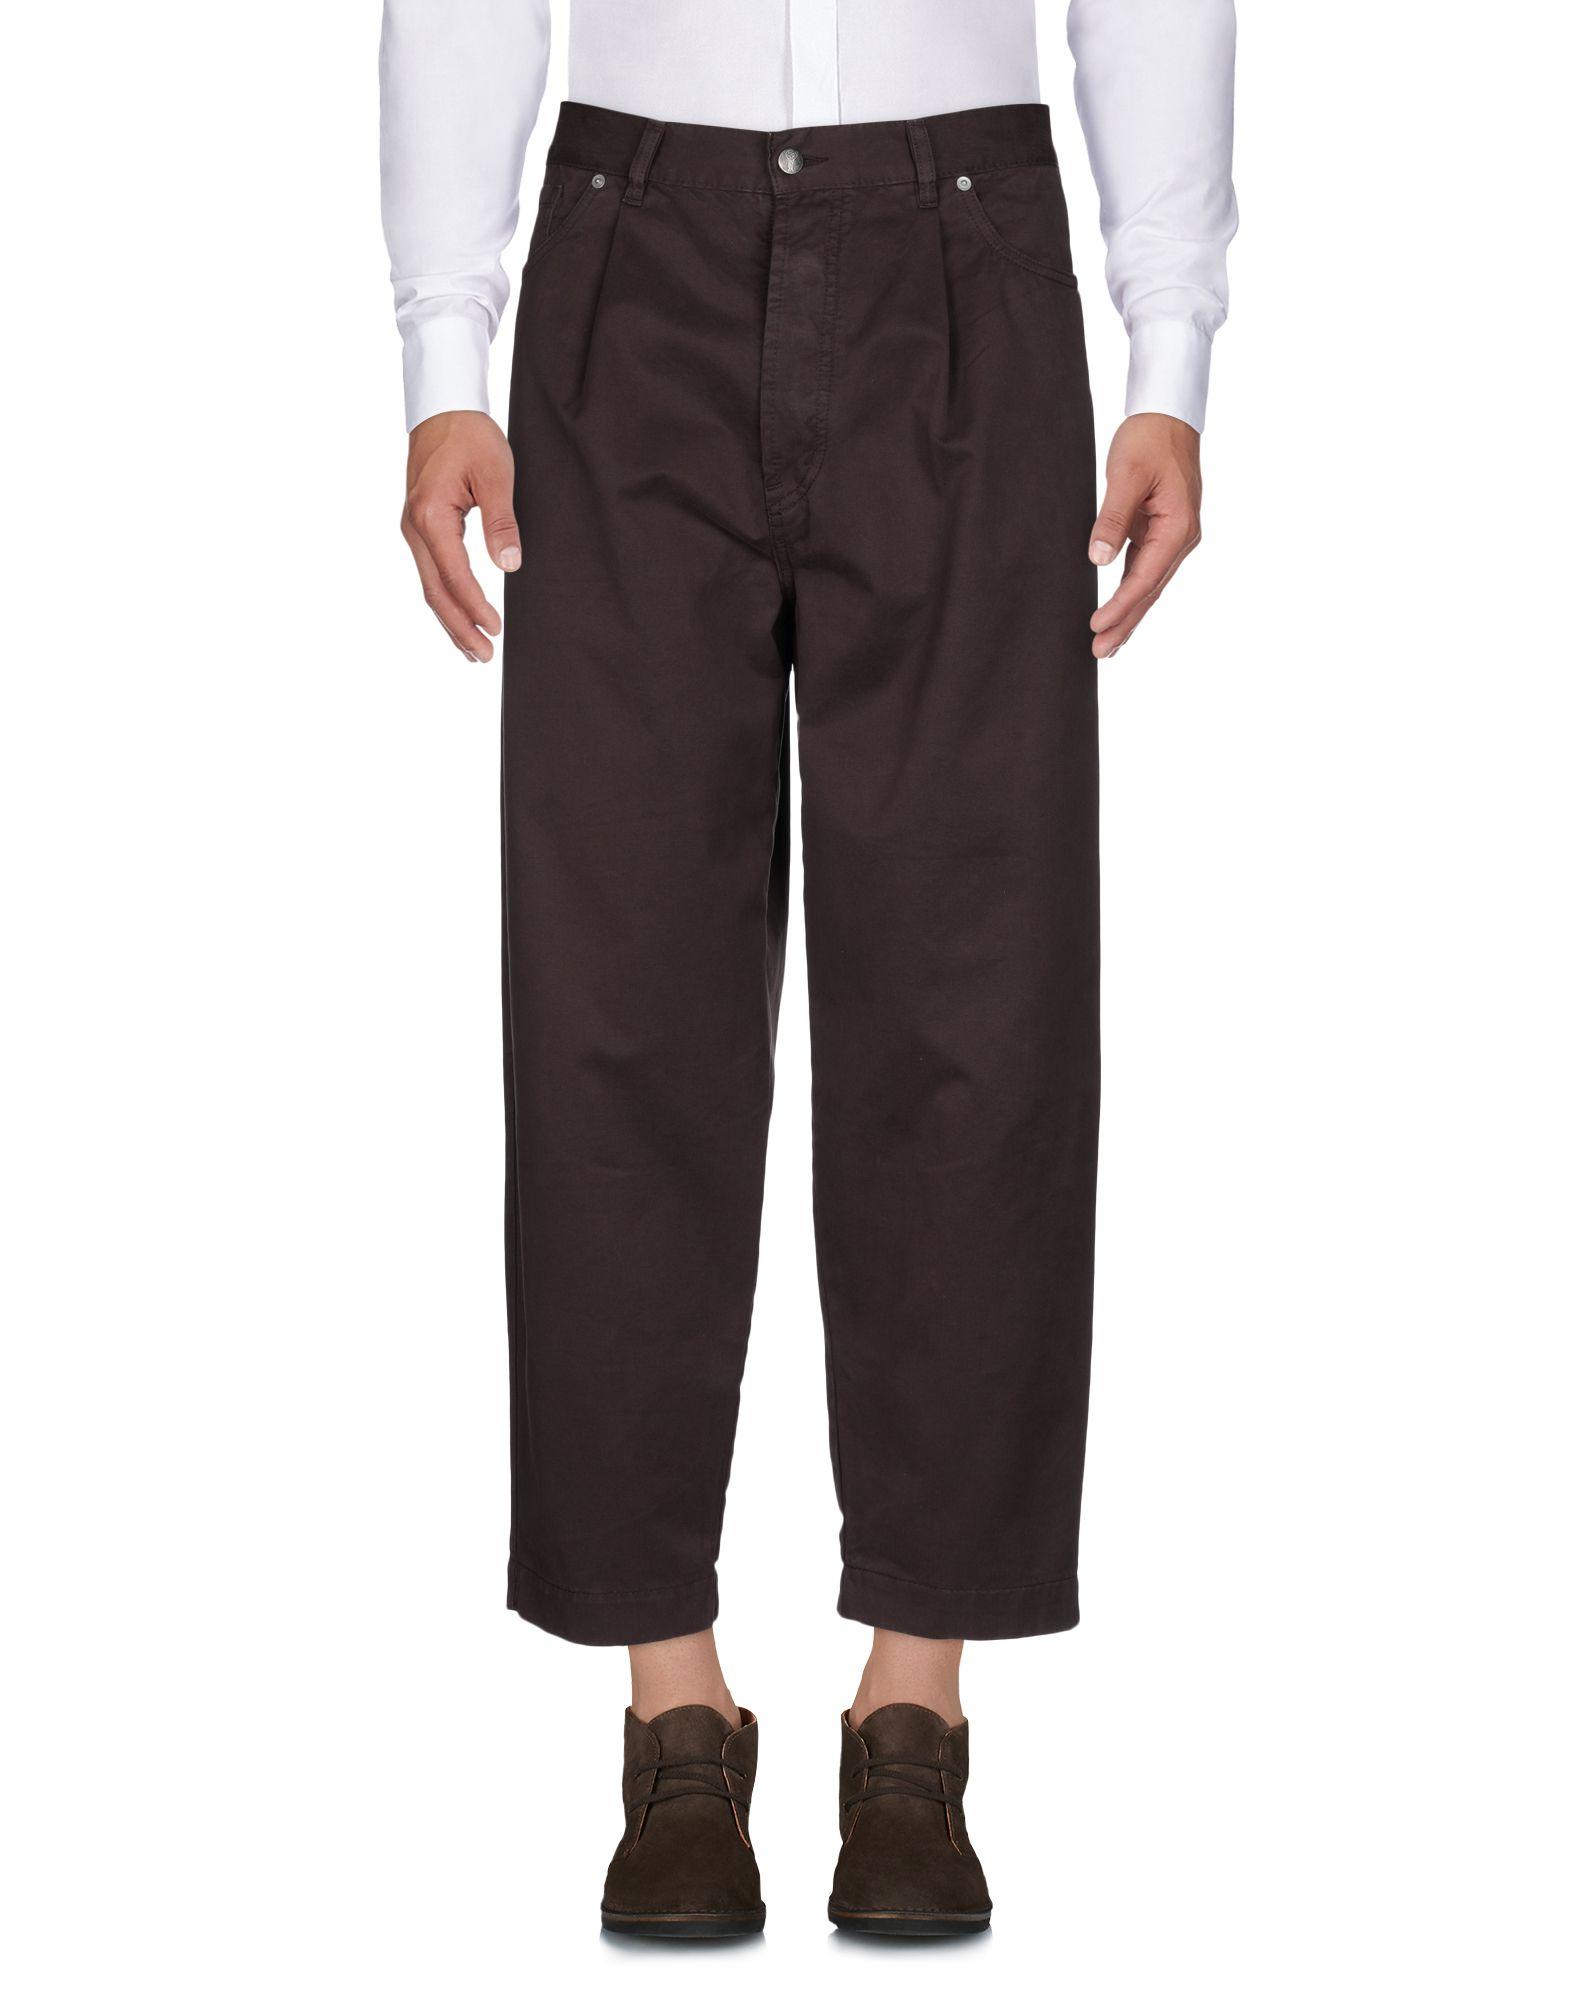 SociÉtÉ Anonyme Casual Pants In Cocoa | ModeSens